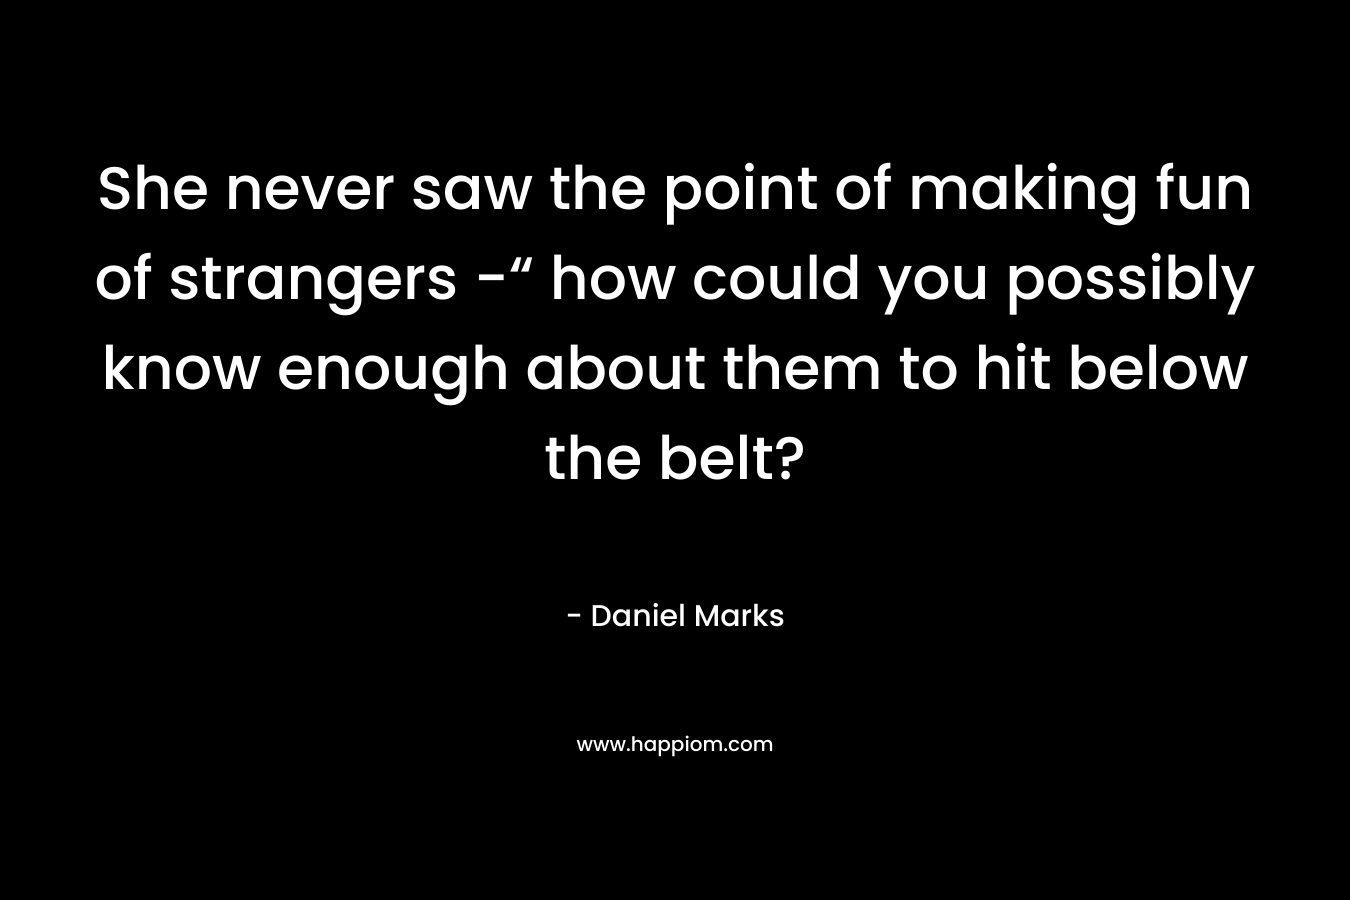 She never saw the point of making fun of strangers -“ how could you possibly know enough about them to hit below the belt? – Daniel Marks